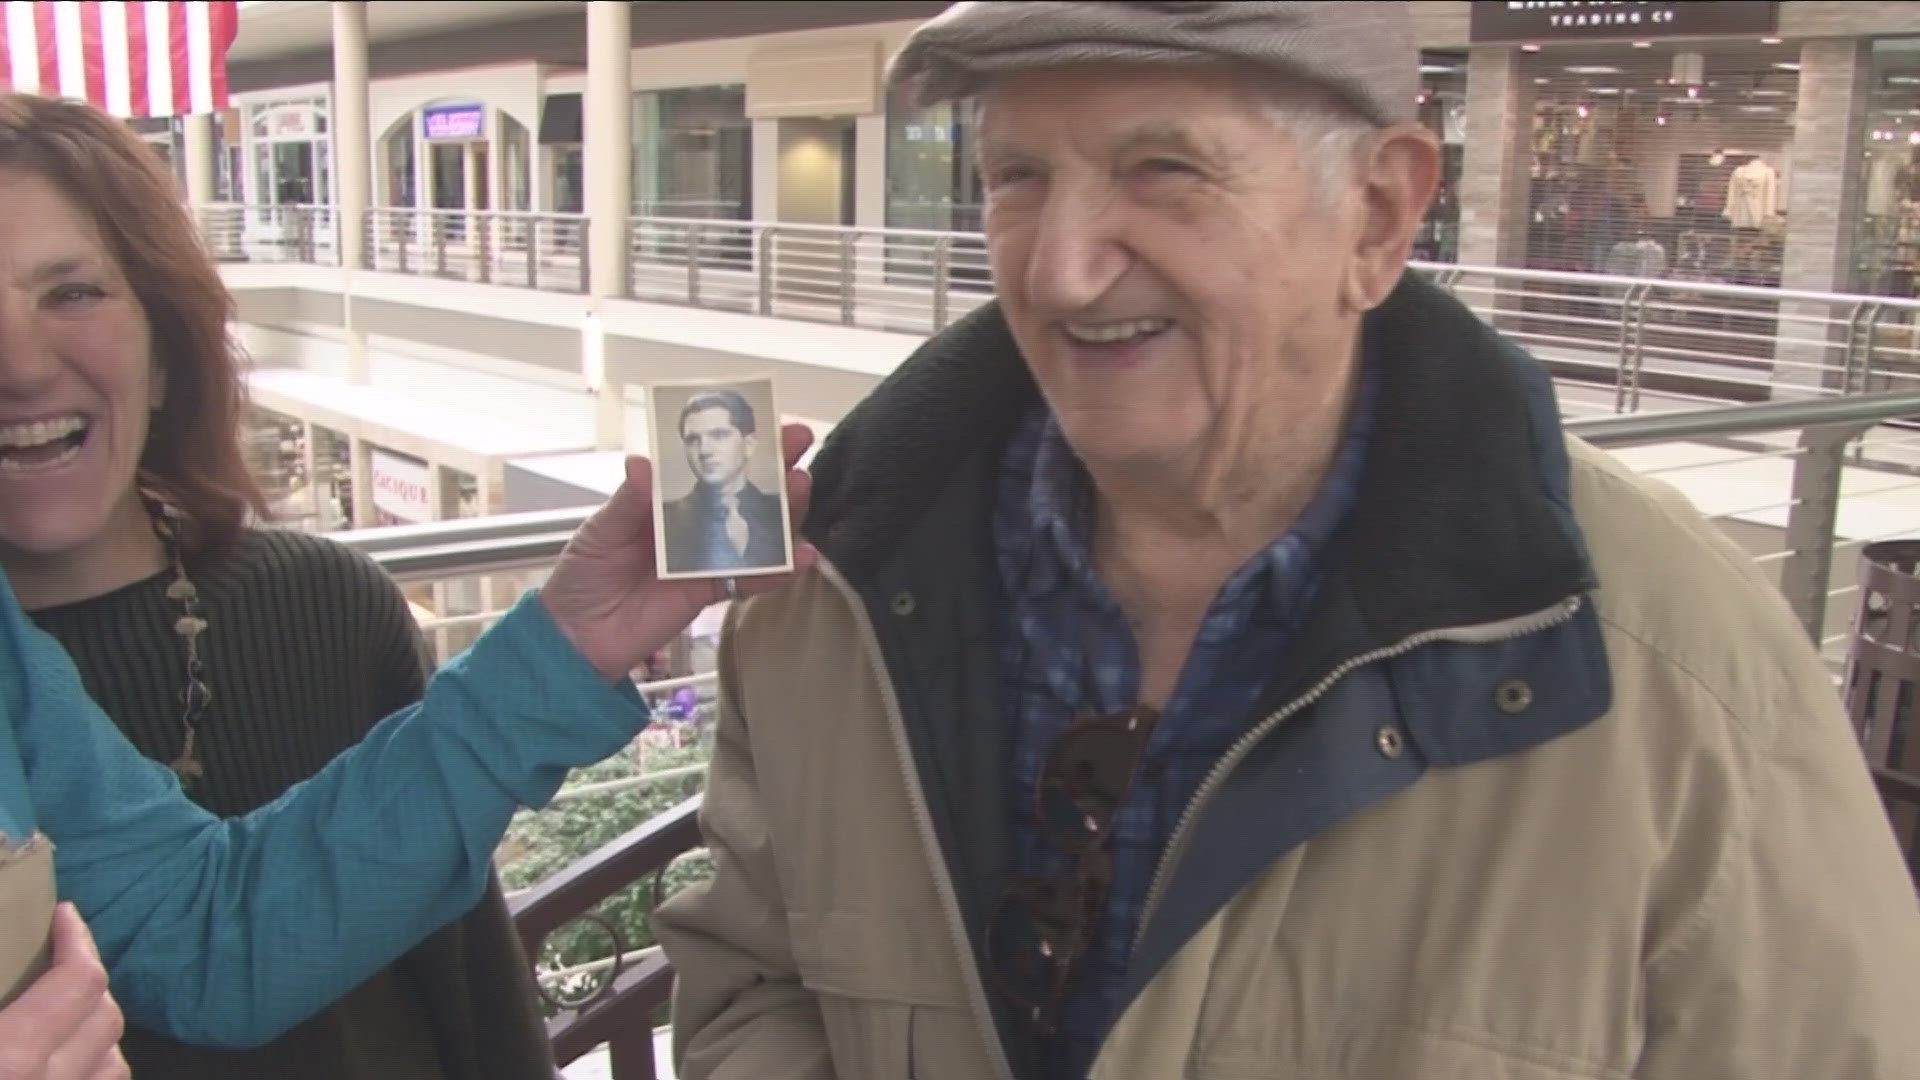 Celebrate WNY: 100th Birthday for the oldest mall walker in WNY